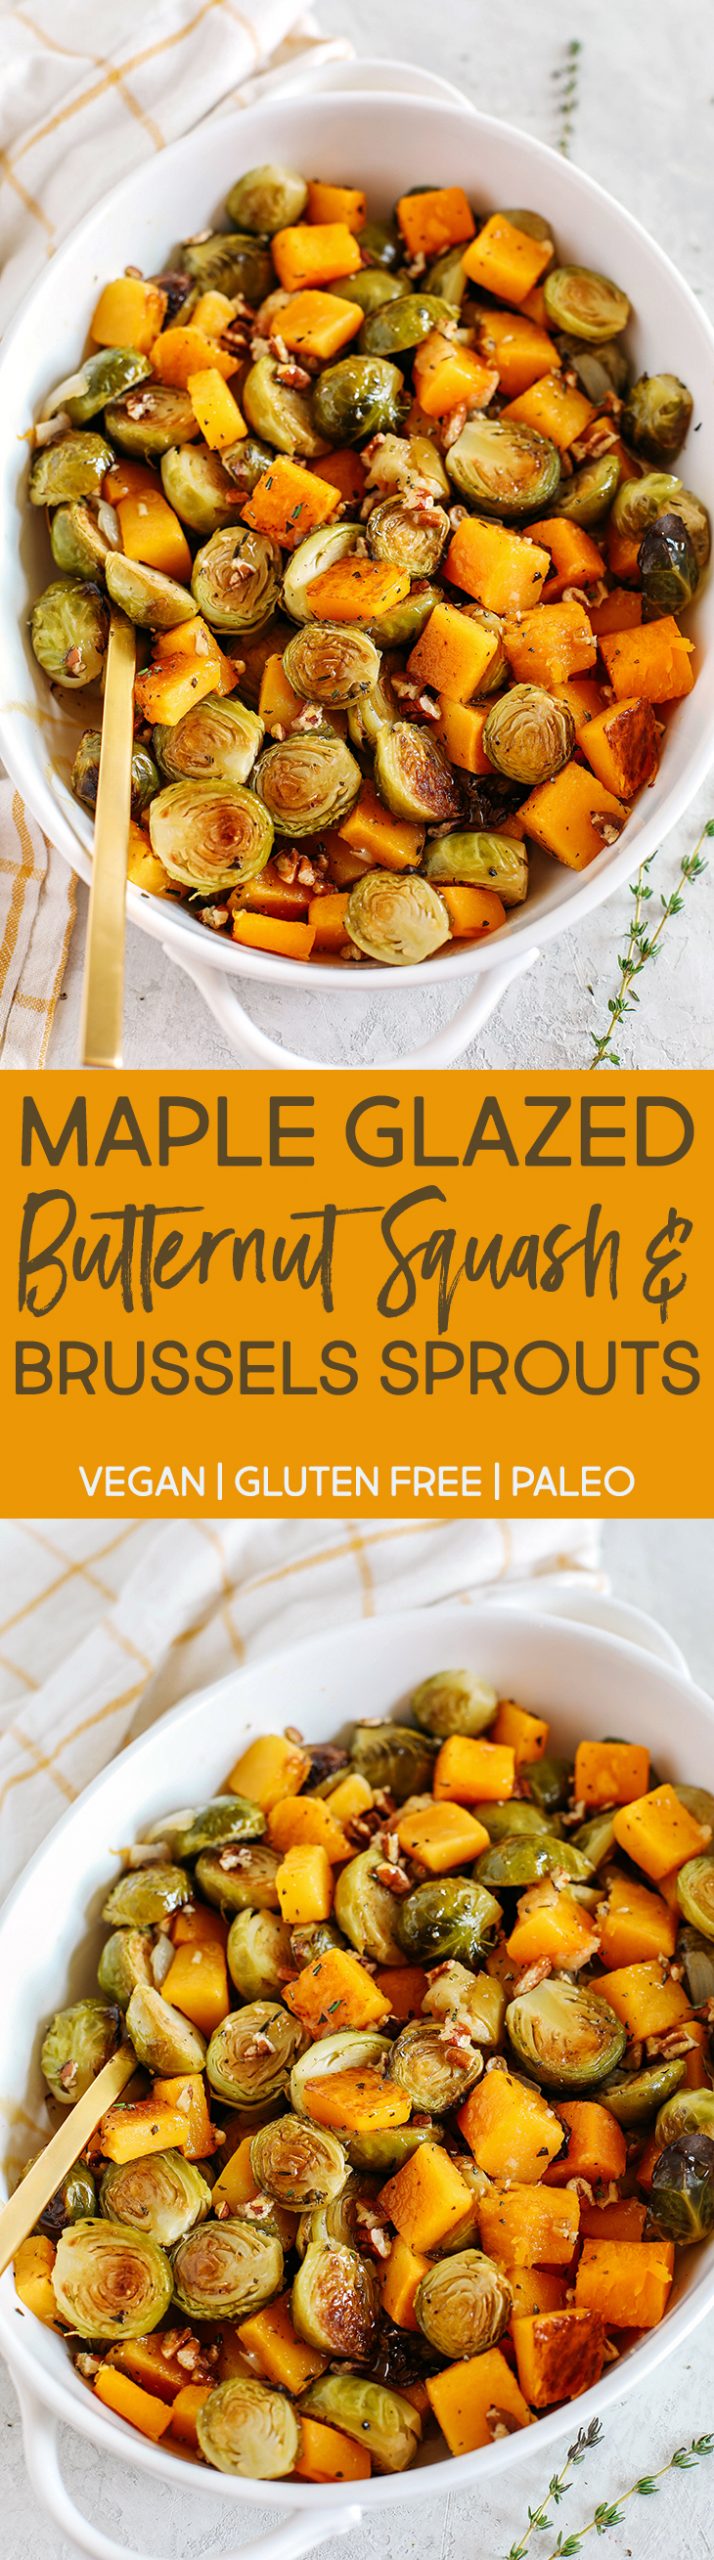 Roasted butternut squash, brussels sprouts and apples all tossed together with fresh herbs, chopped pecans and drizzled with a delicious maple dijon glaze!  The perfect side dish to your holiday meal!